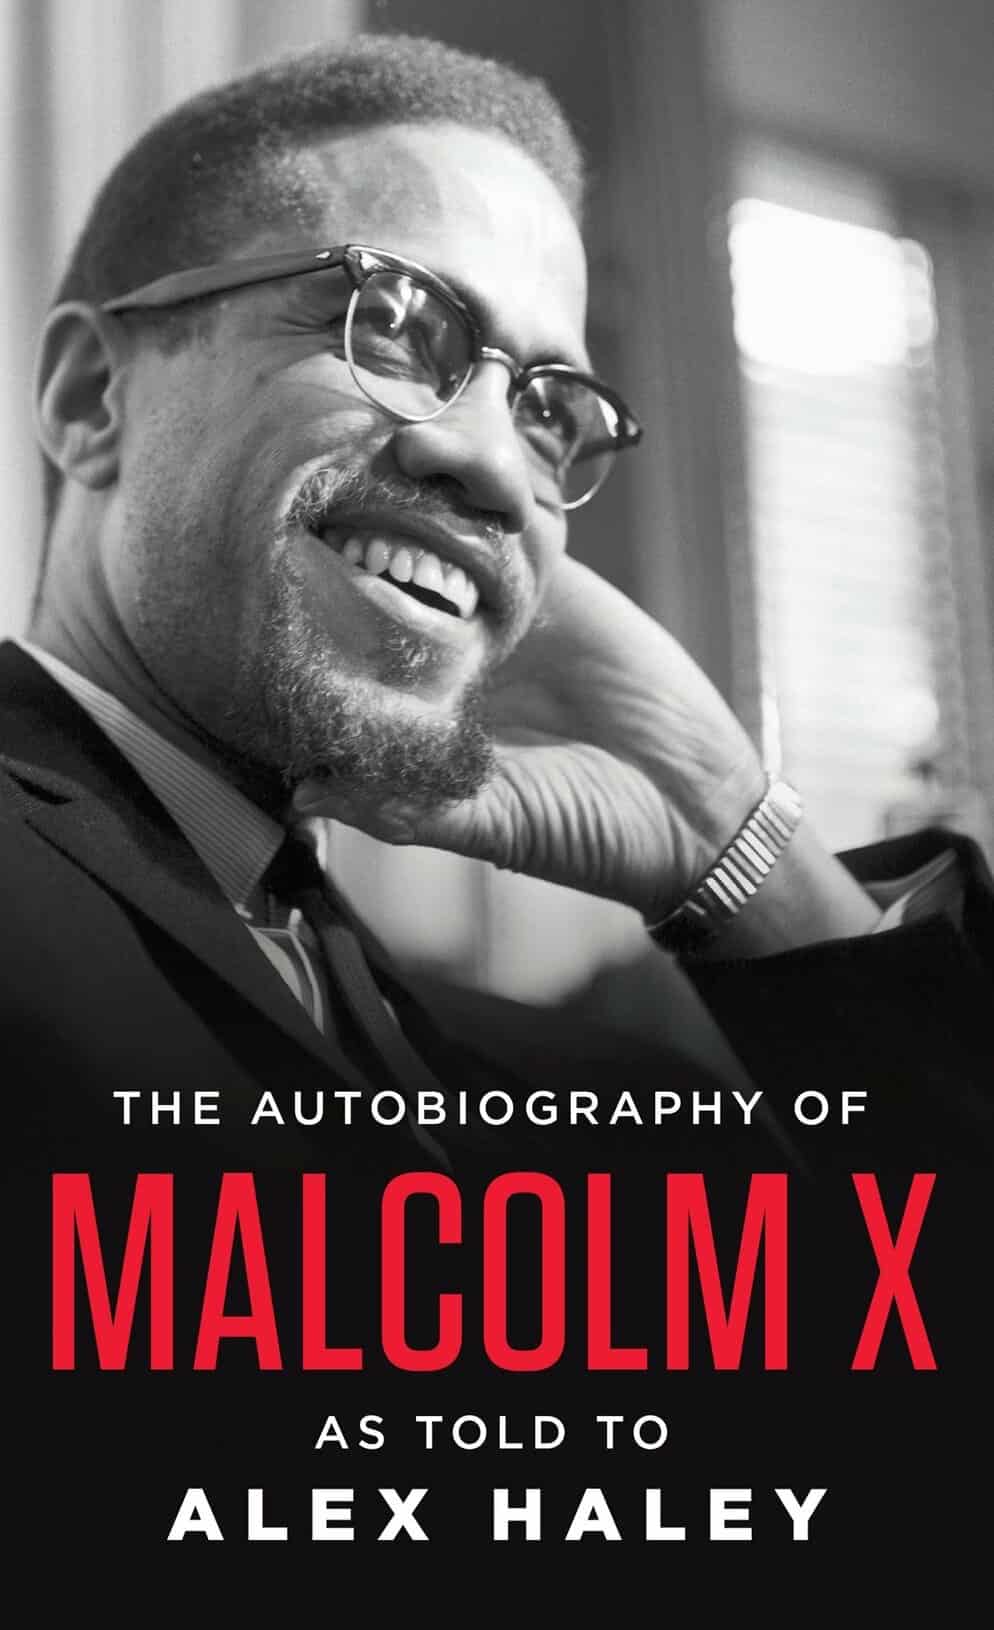 The Autobiography of Malcolm X by Malcolm X